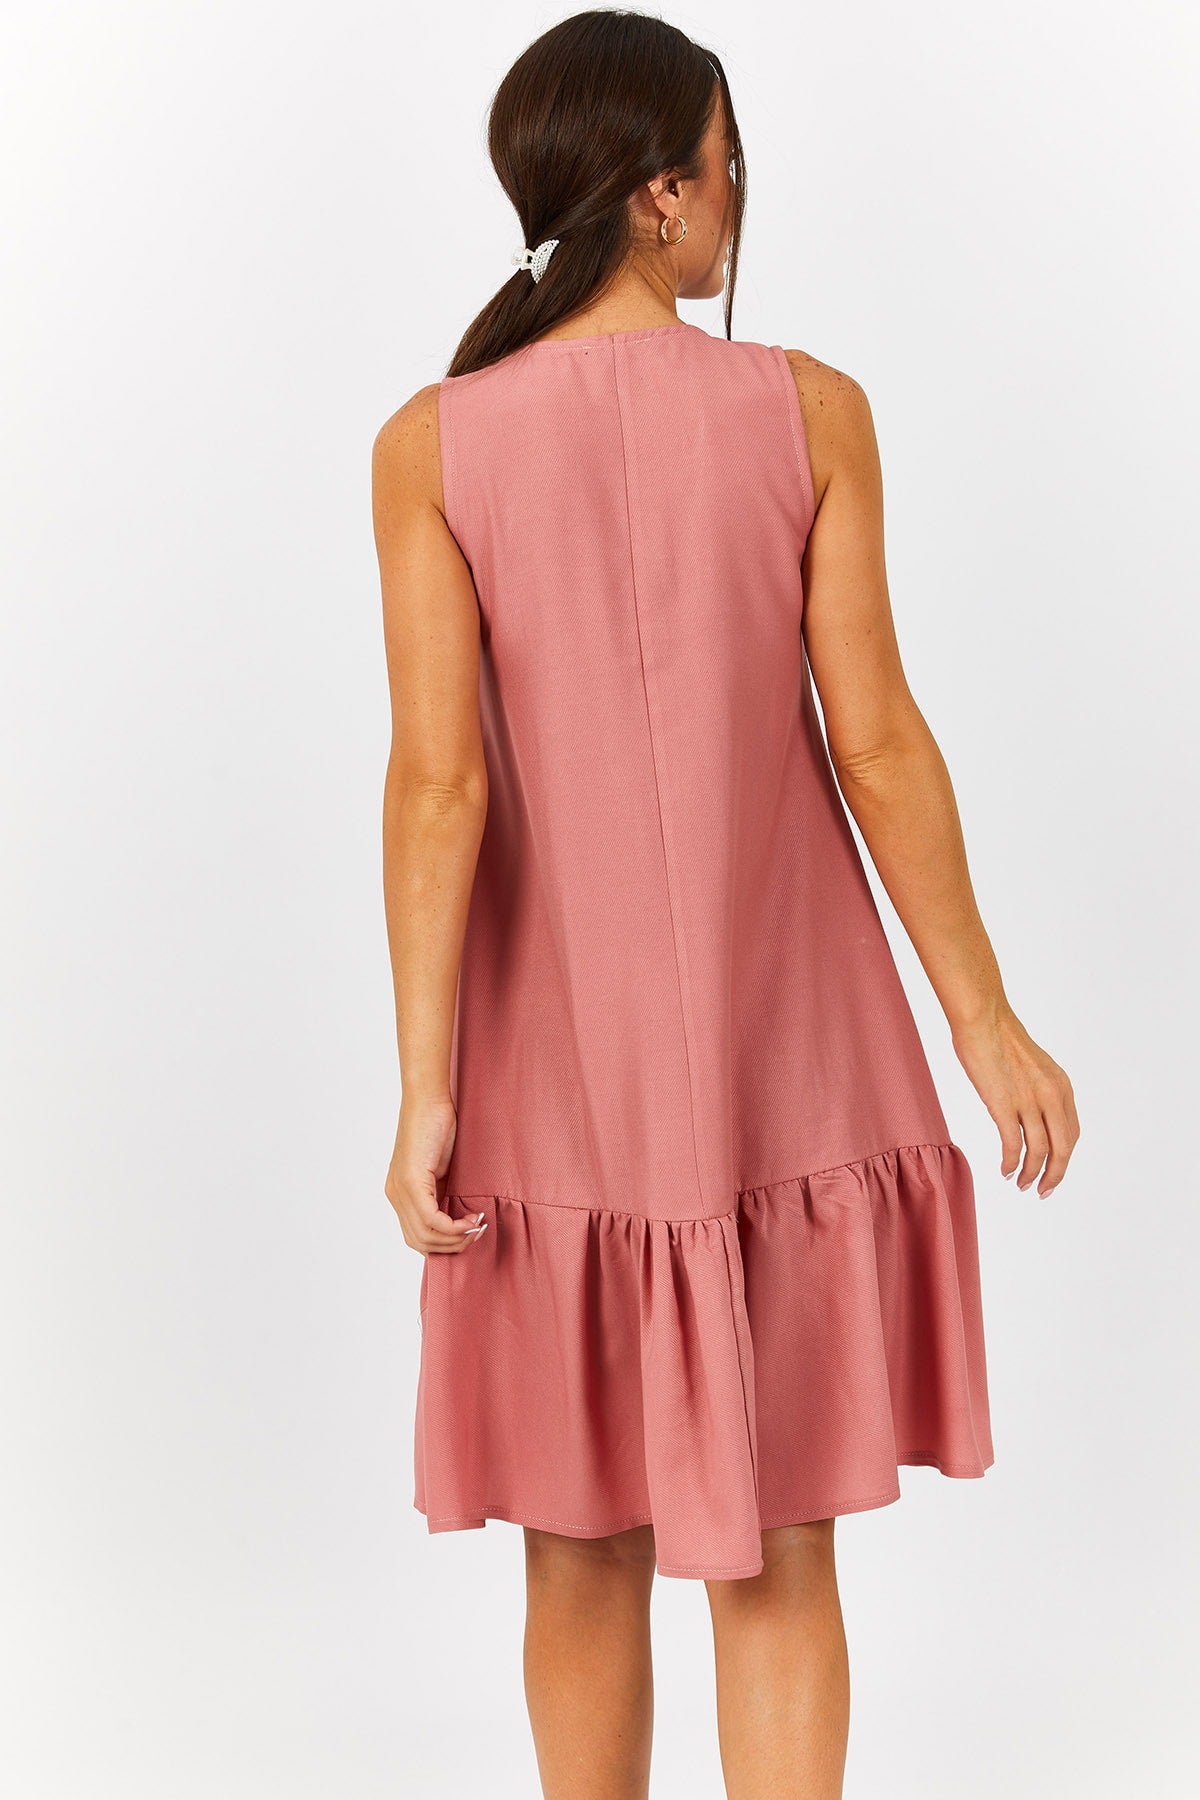 WOMEN'S ROSE DRIVER SPEP RISKED front buttoned sleeveless dress ARM-221153